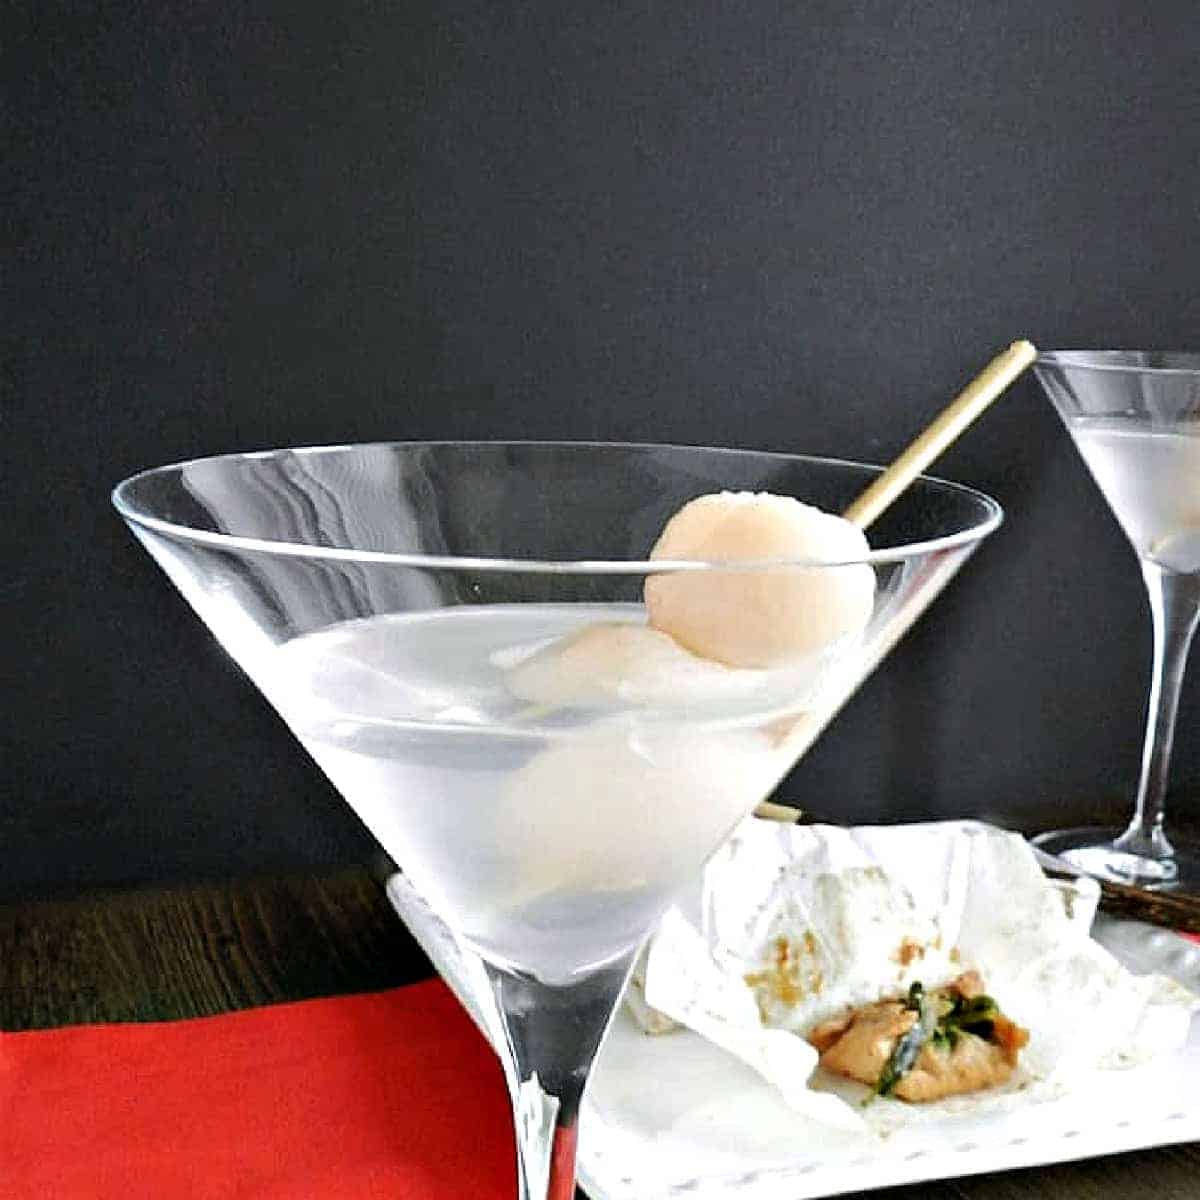 Martini garnished with three lychees on a toothpick.